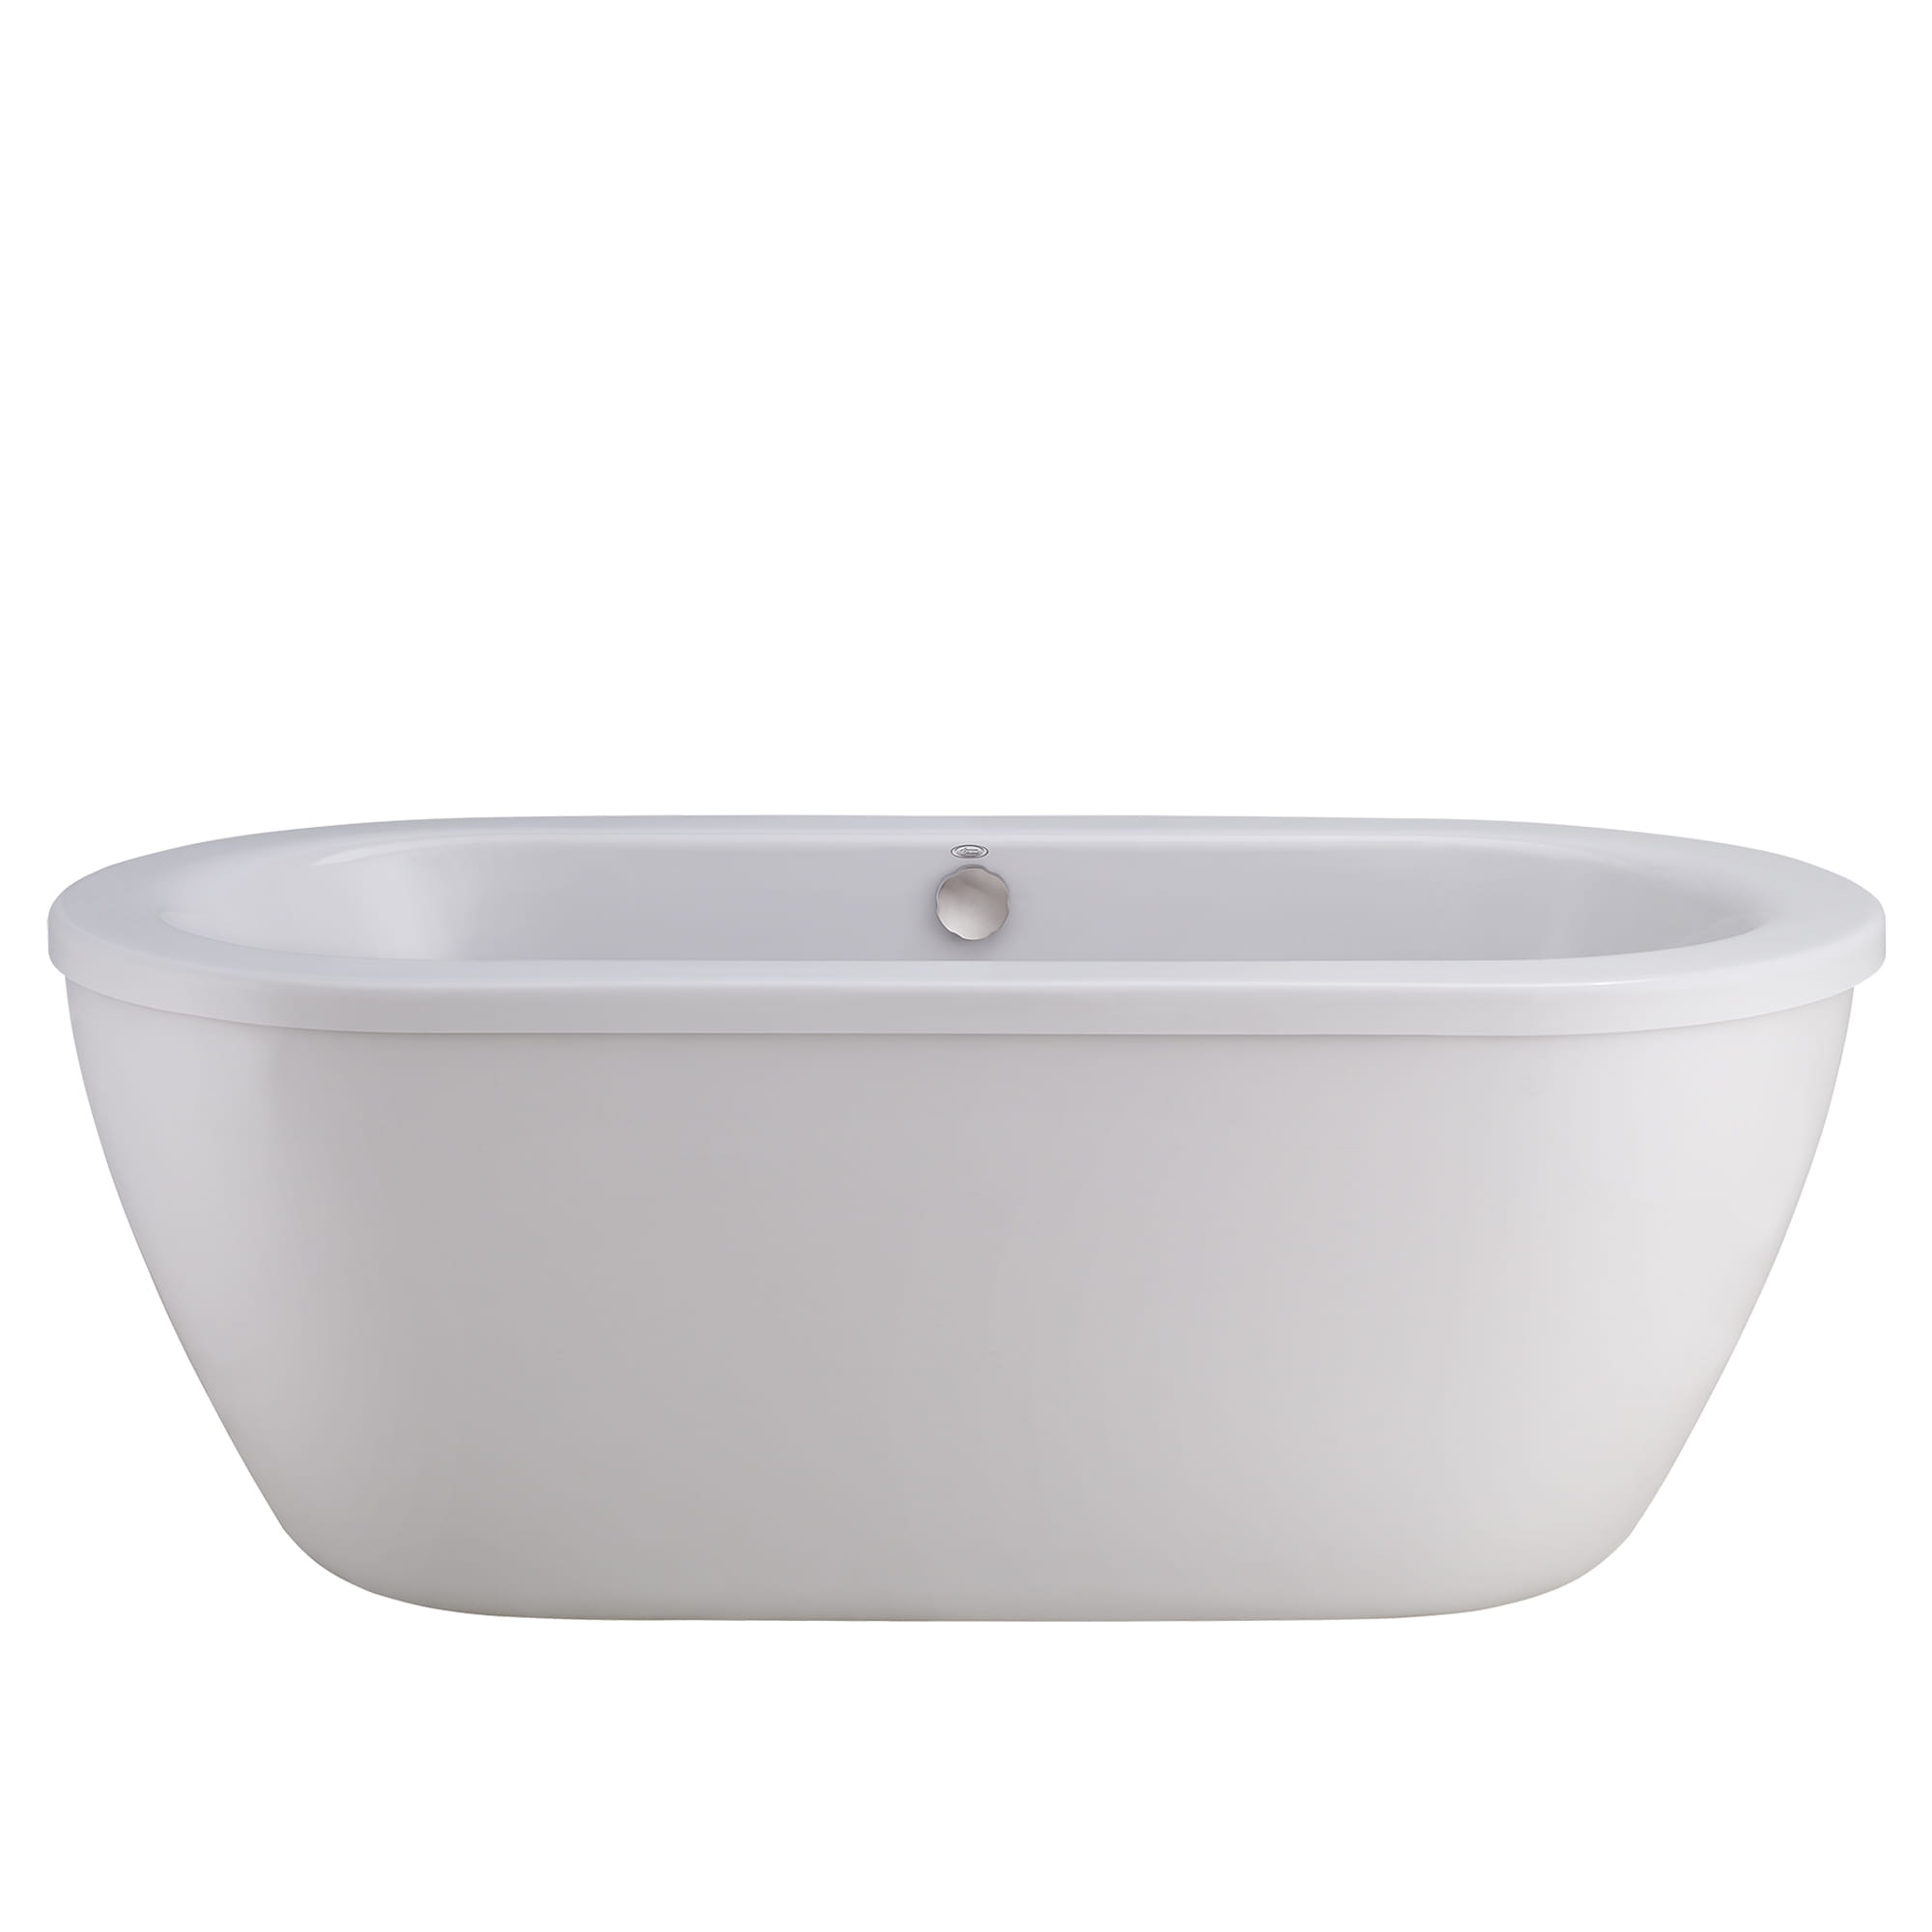 Cadet® 66 x 32-Inch Freestanding Bathtub With Polished Chrome Finish Filler and Drain Kit